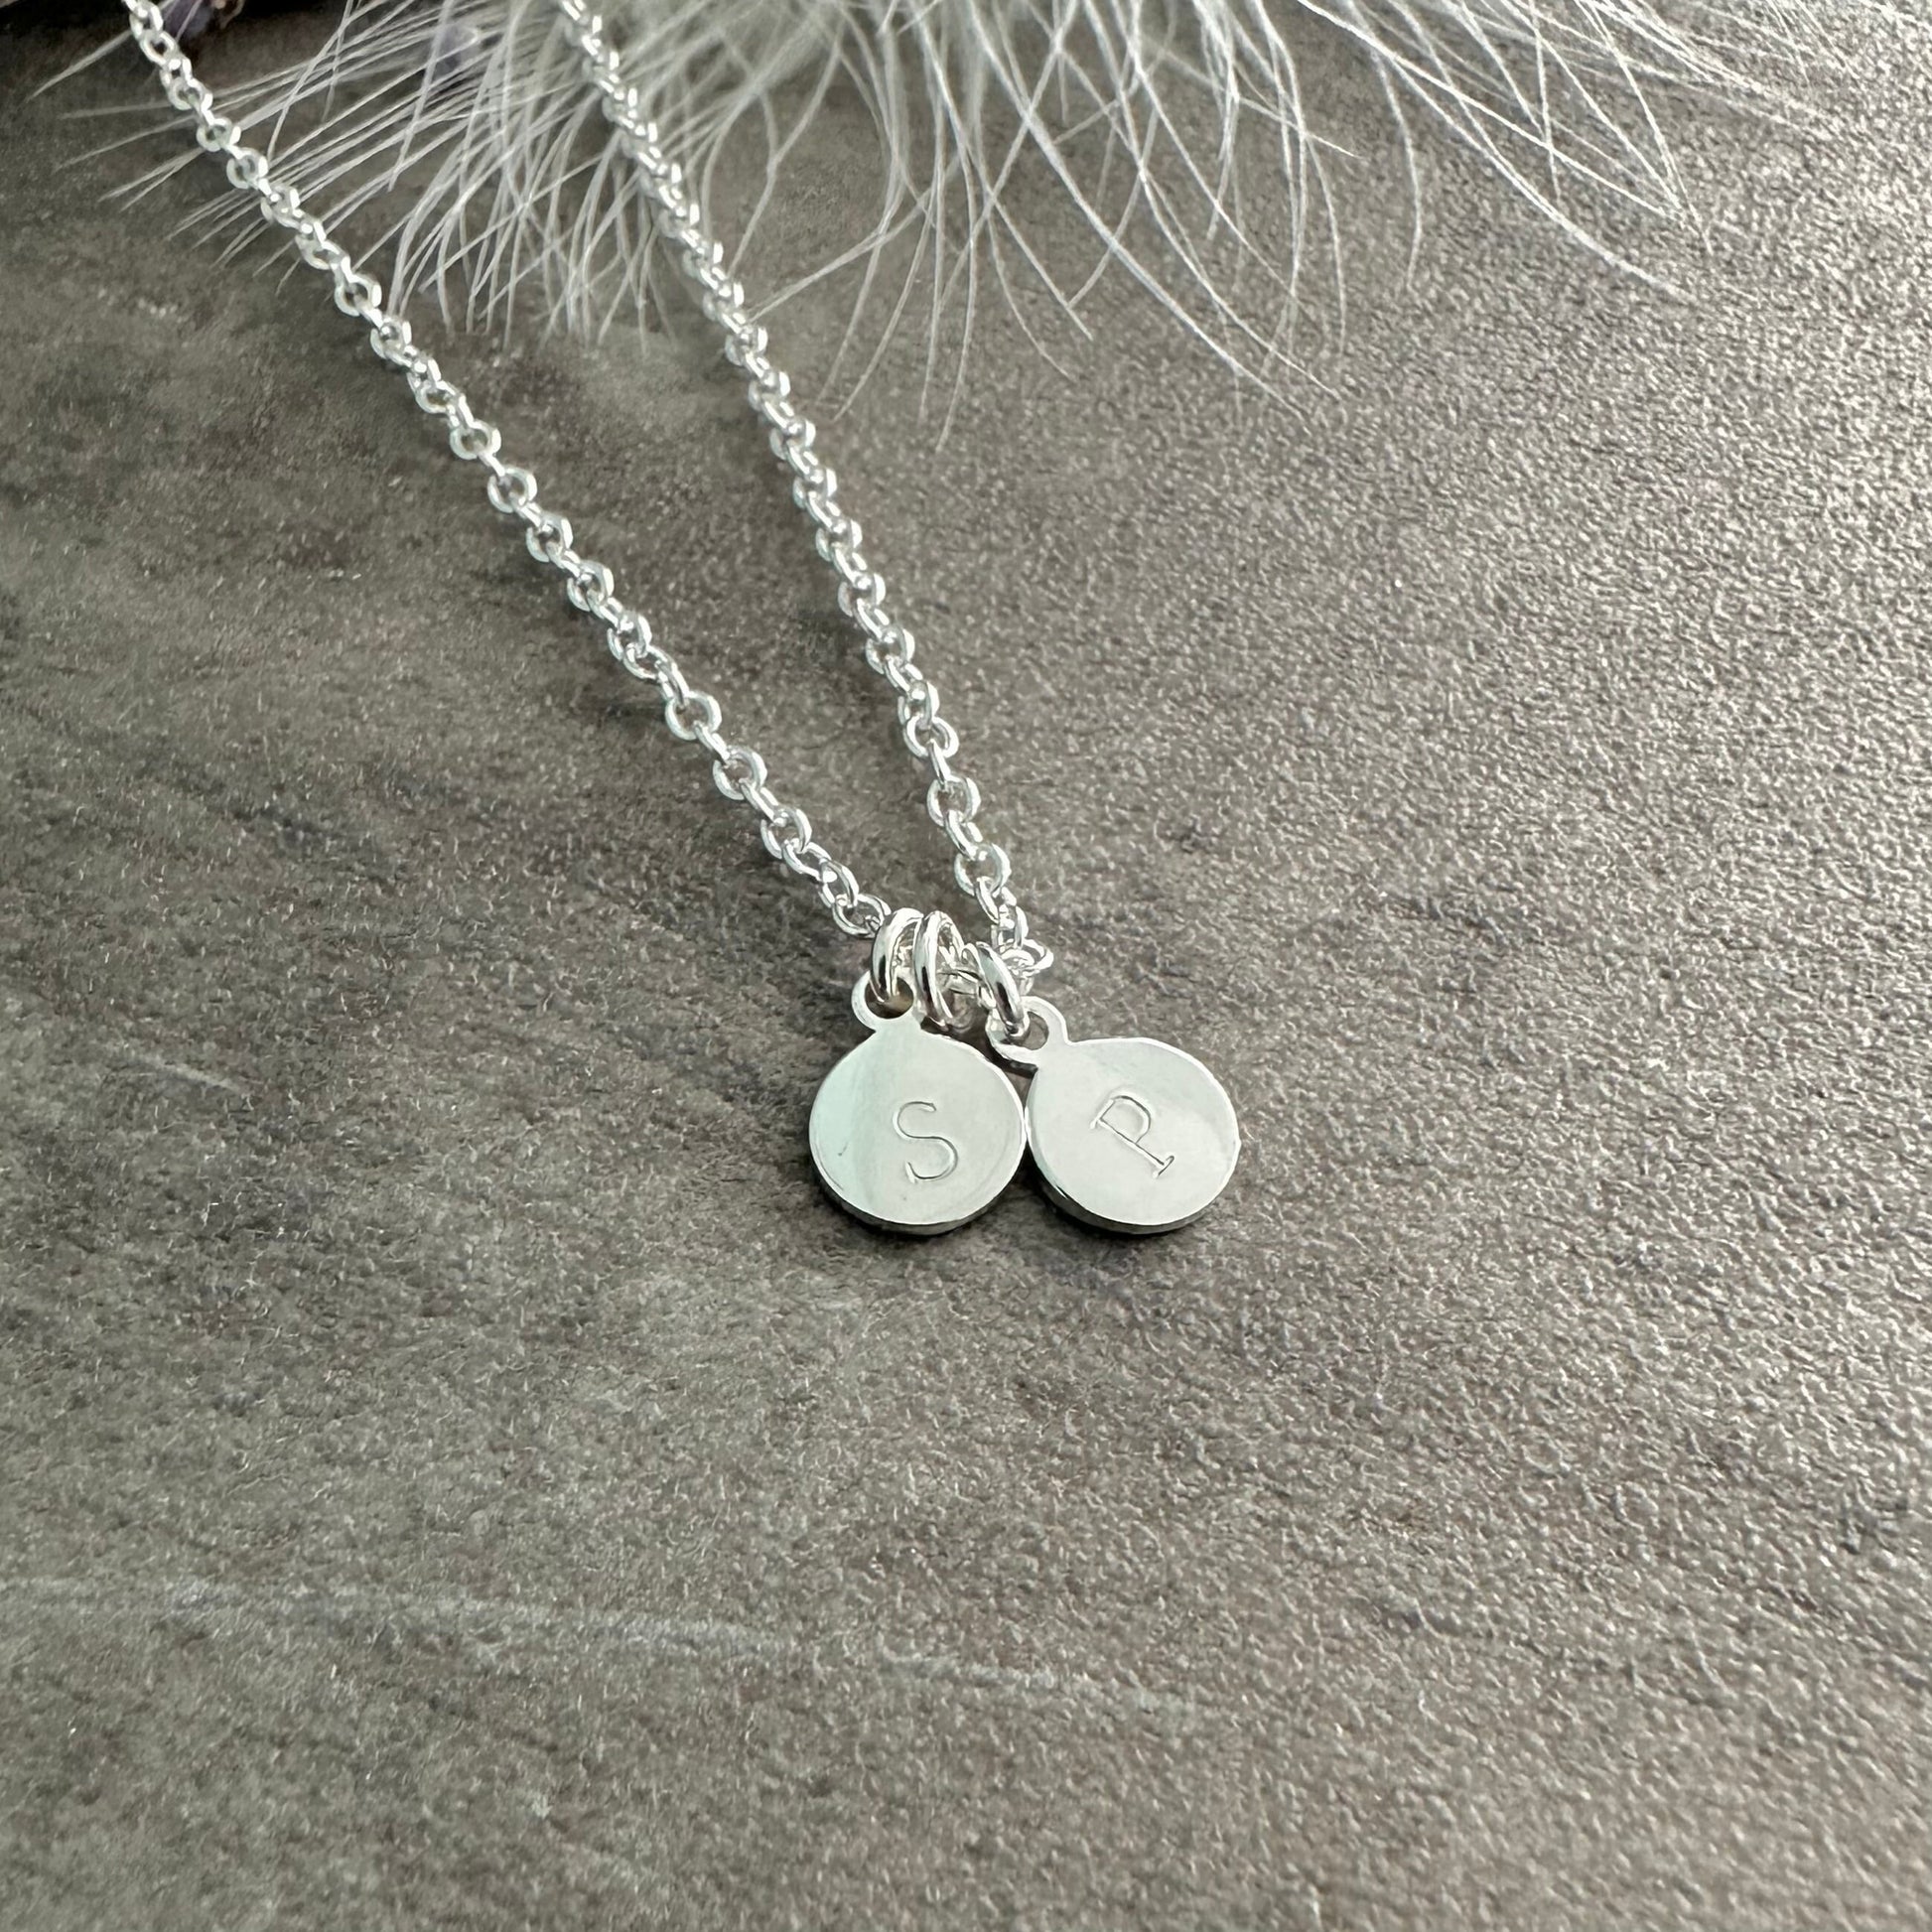 Personalised Family Initial Disc Necklace, Childrens Initials Necklace